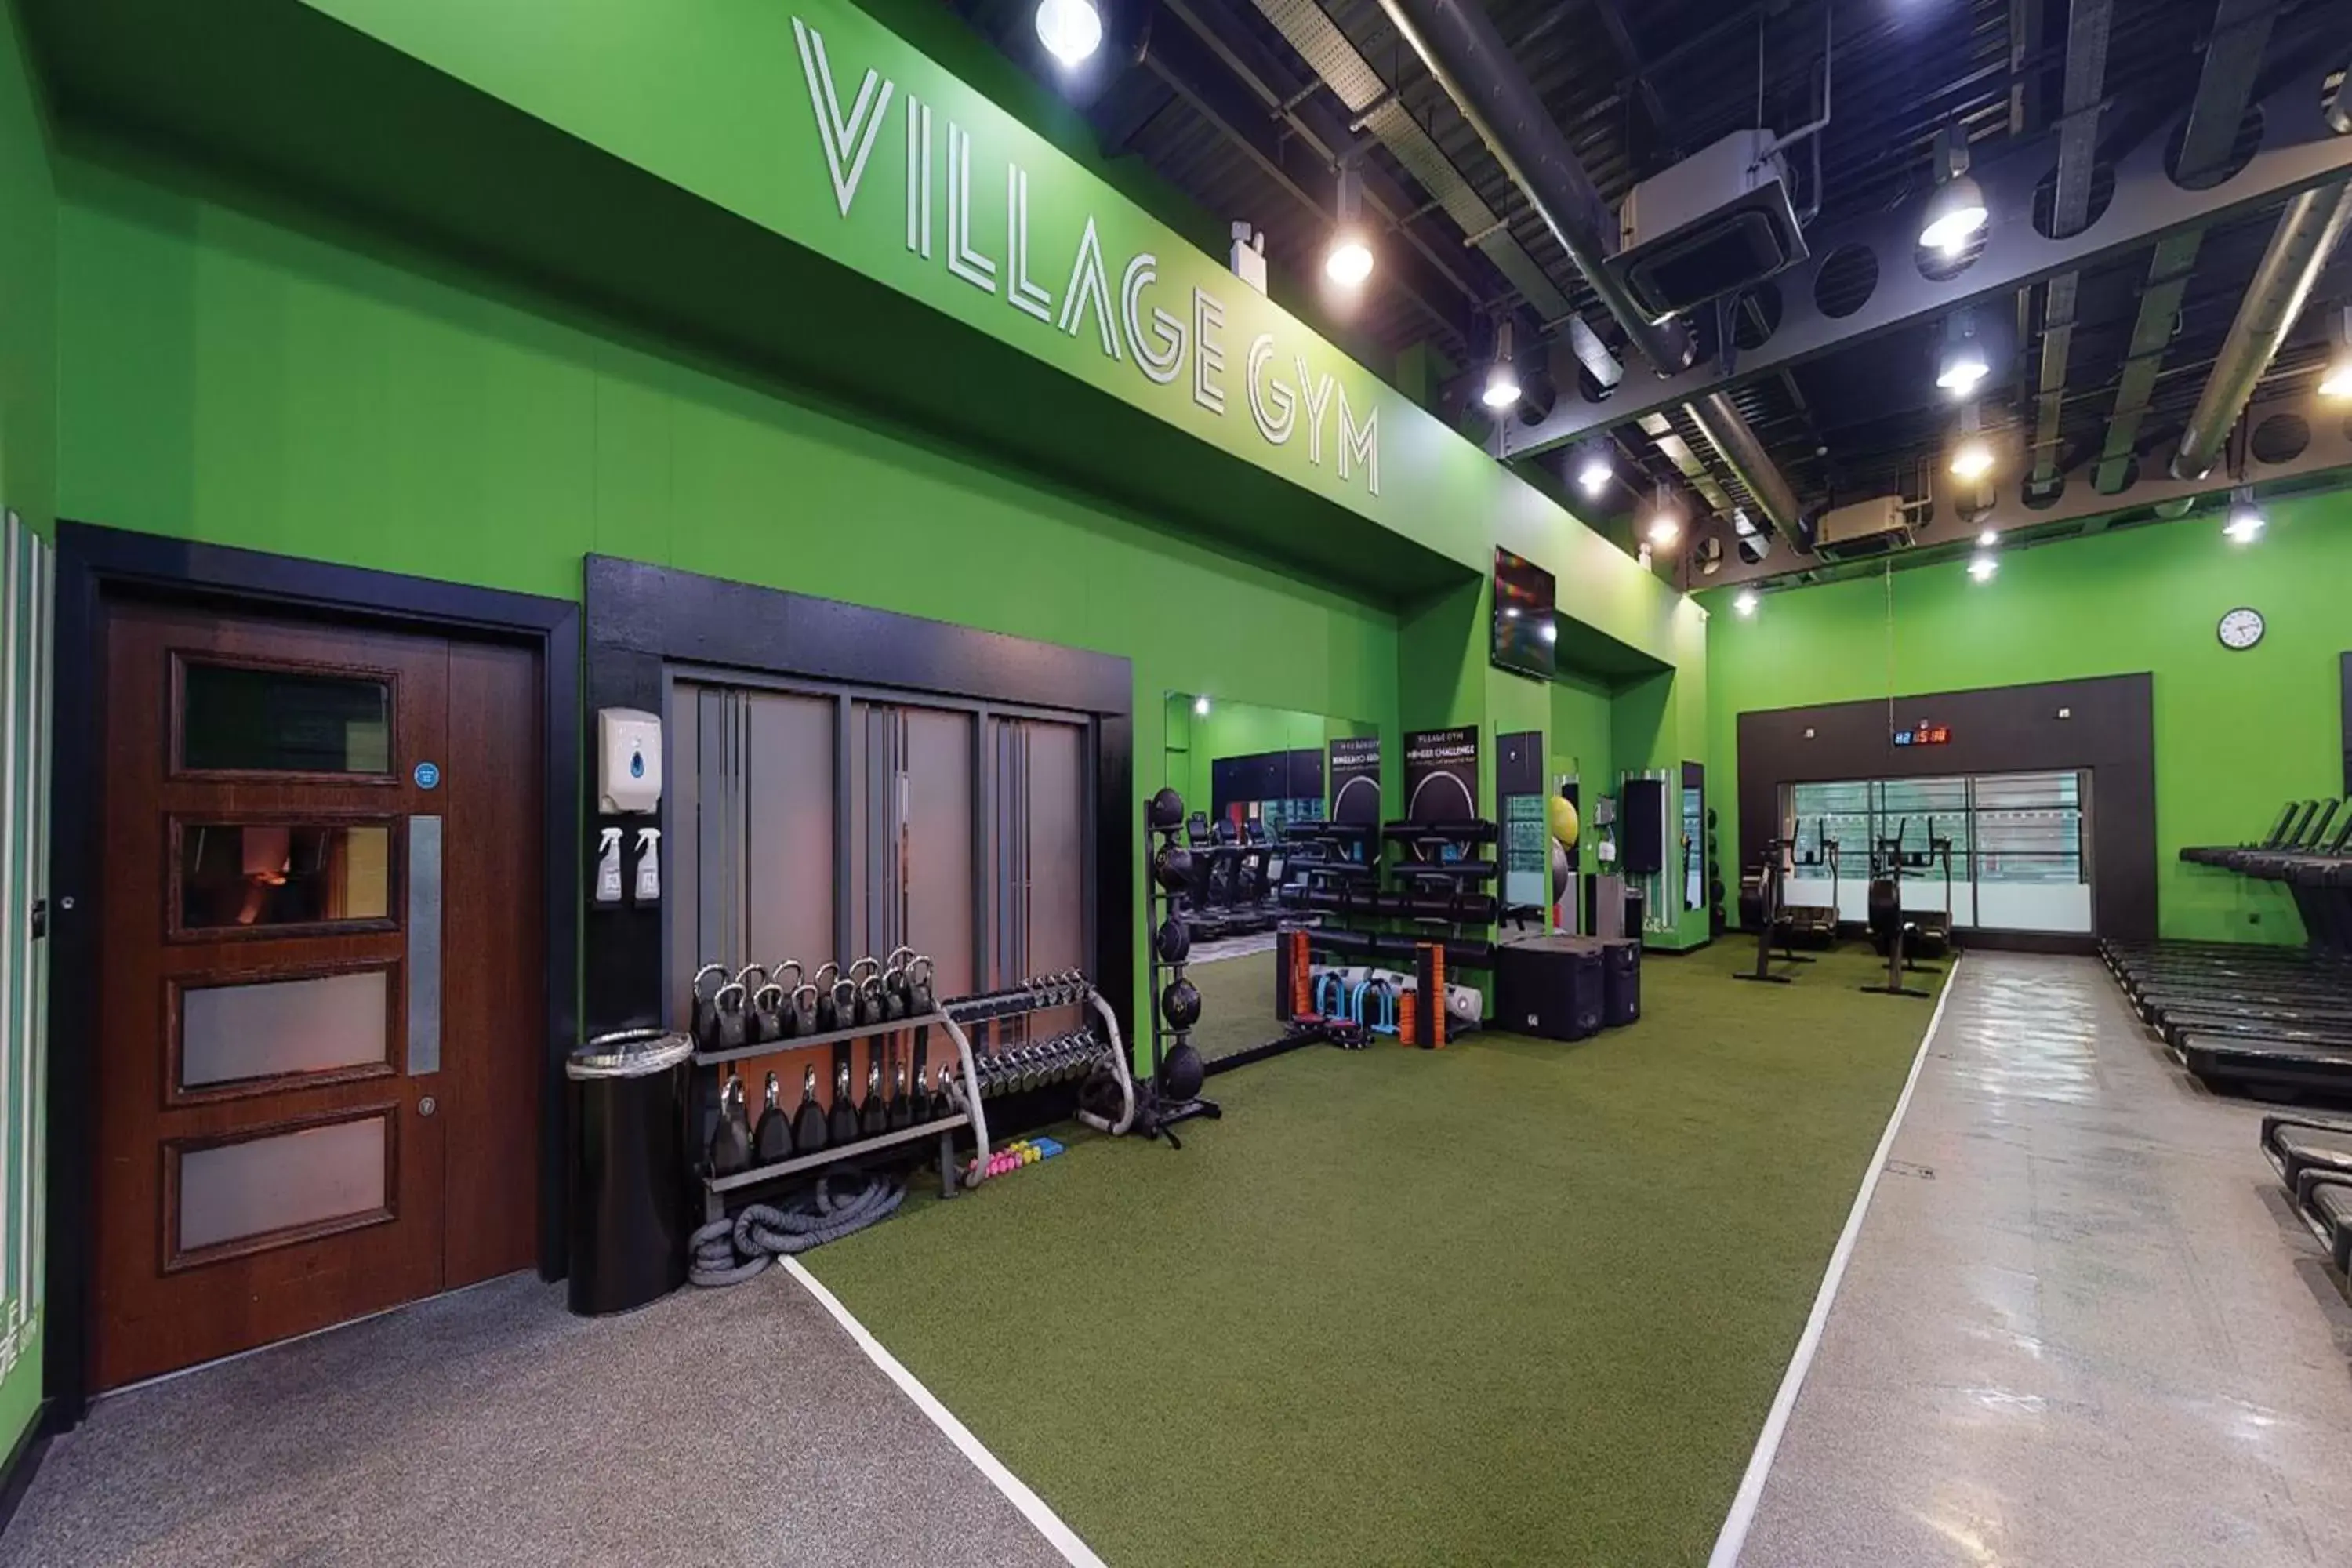 Fitness centre/facilities in Village Hotel London Watford